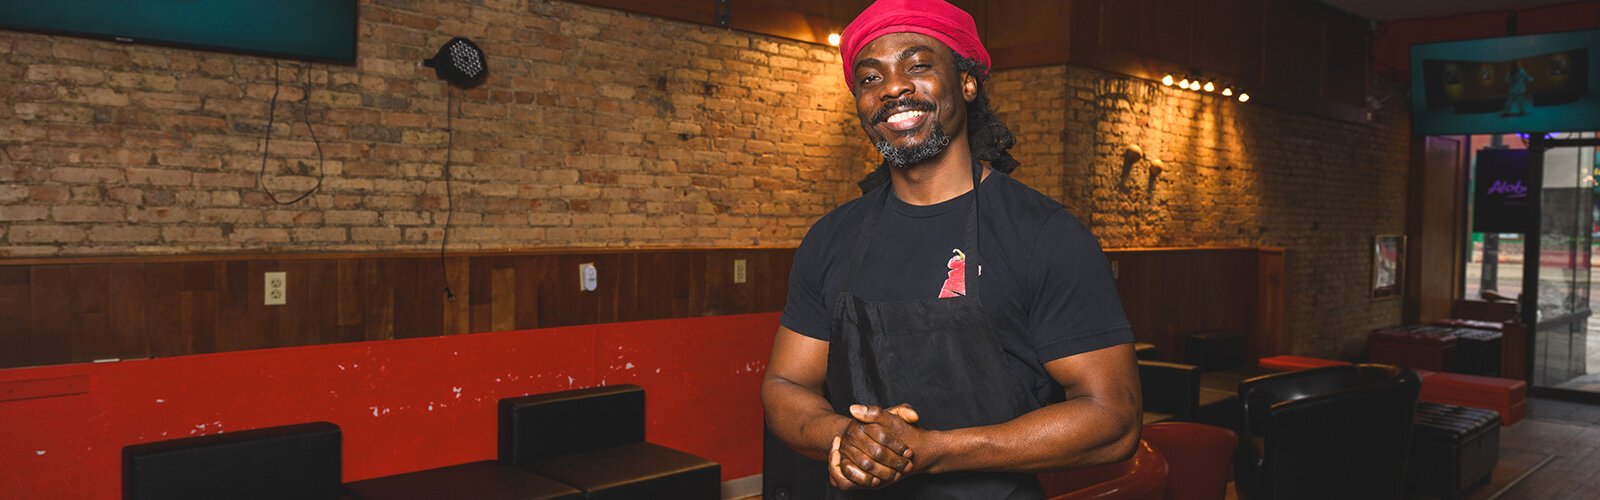 Taiwo Adelye is the owner of Tatse, a restaurant in Lansing.